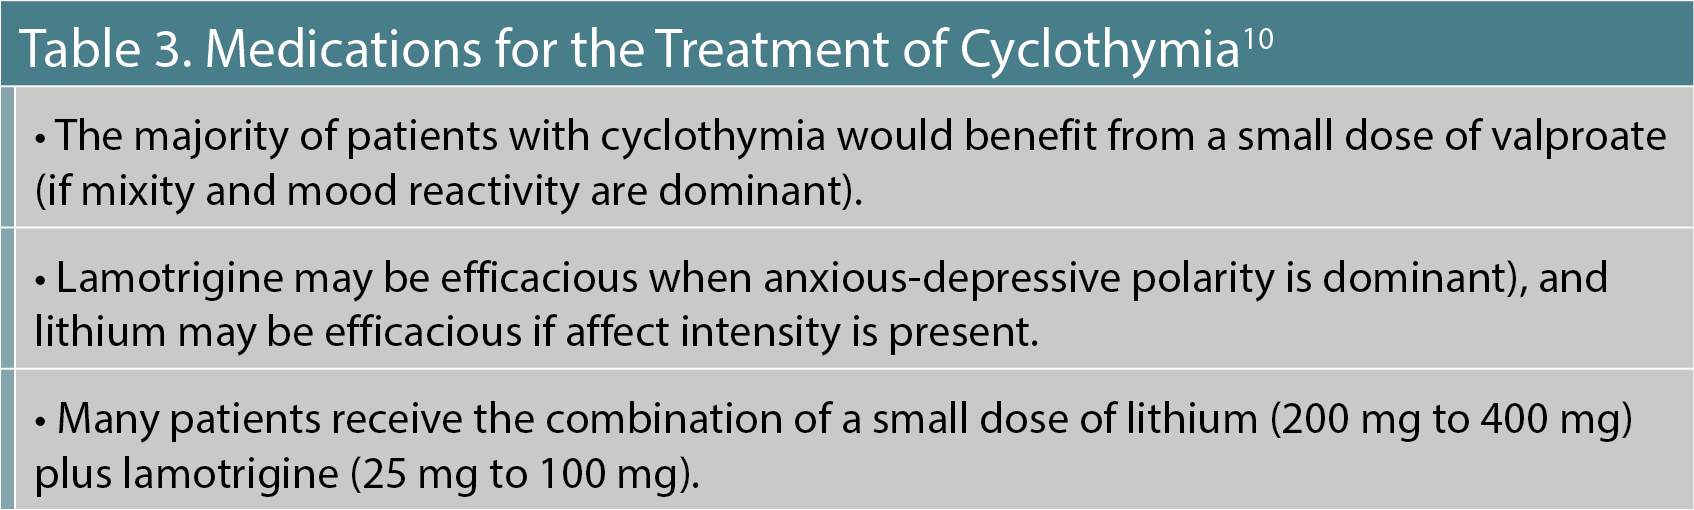 Table 3. Medications for the Treatment of Cyclothymia